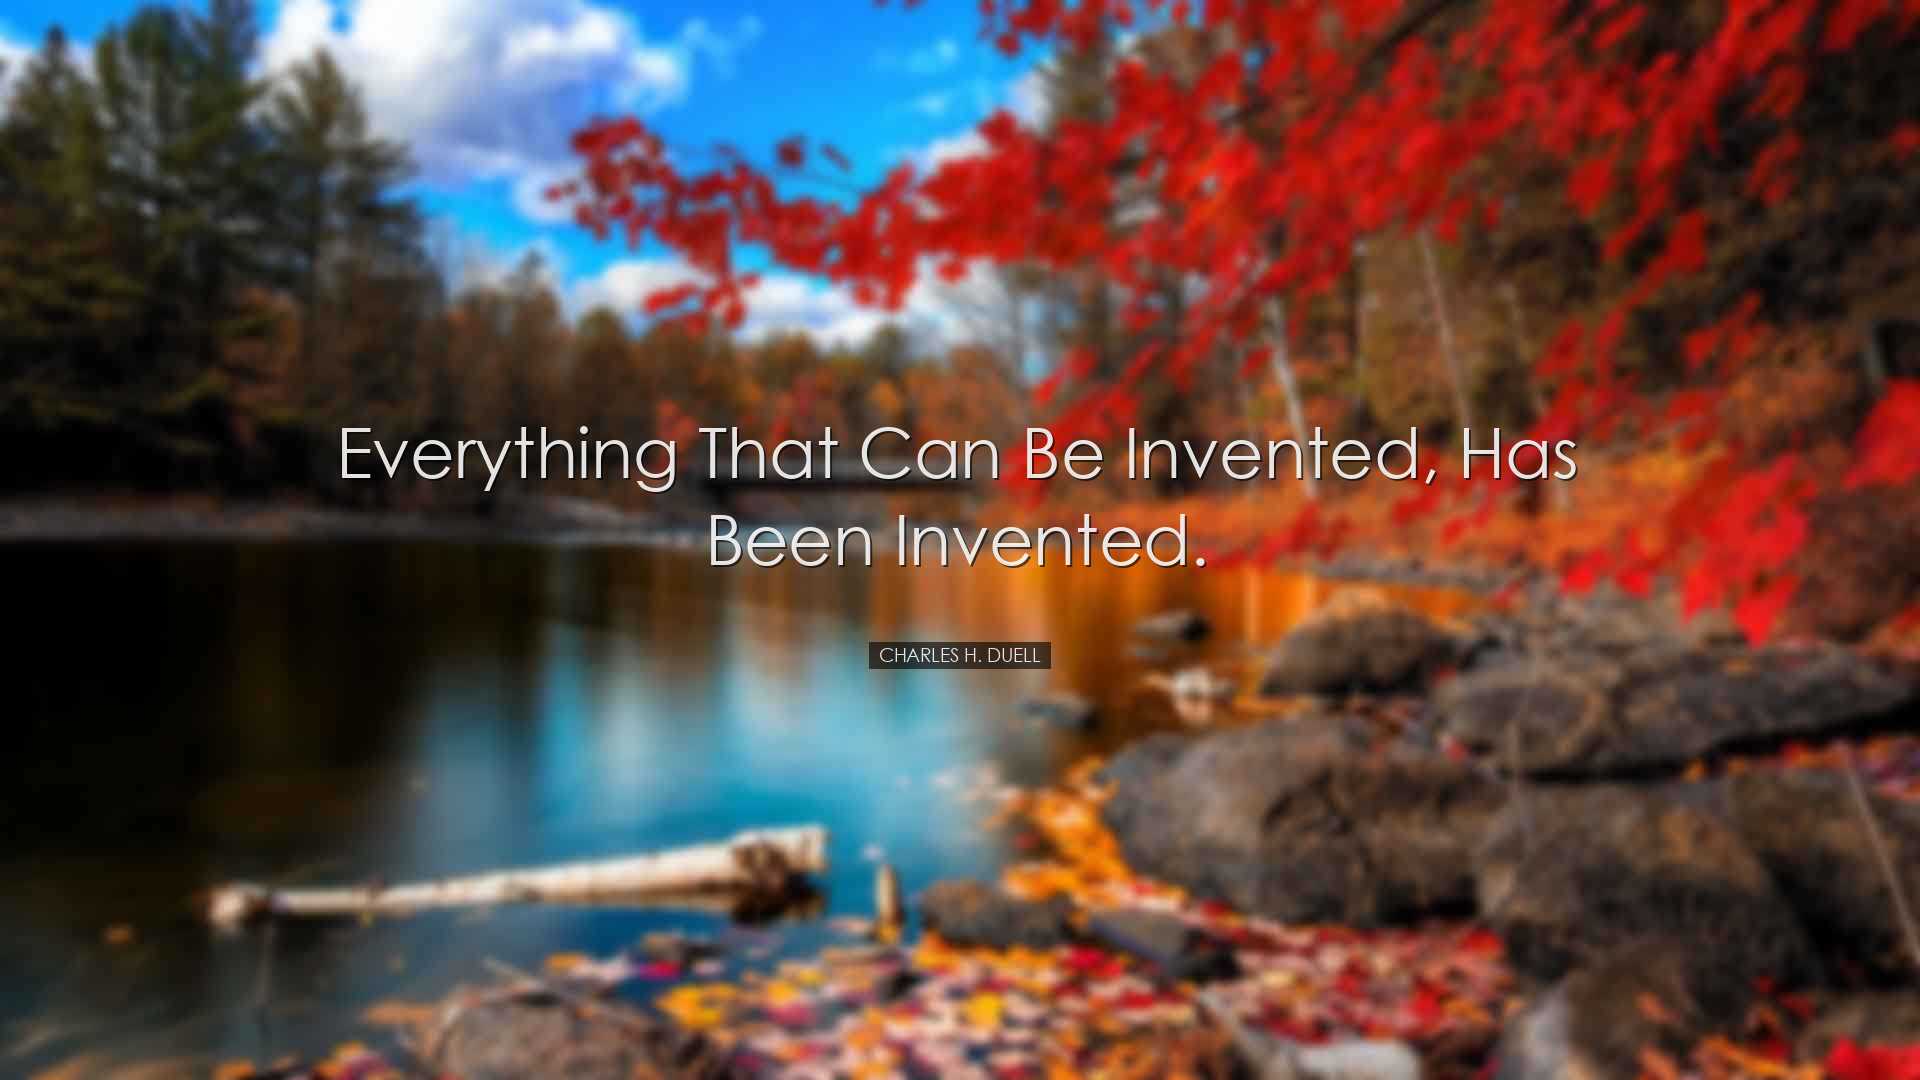 Everything that can be invented, has been invented. - Charles H. D